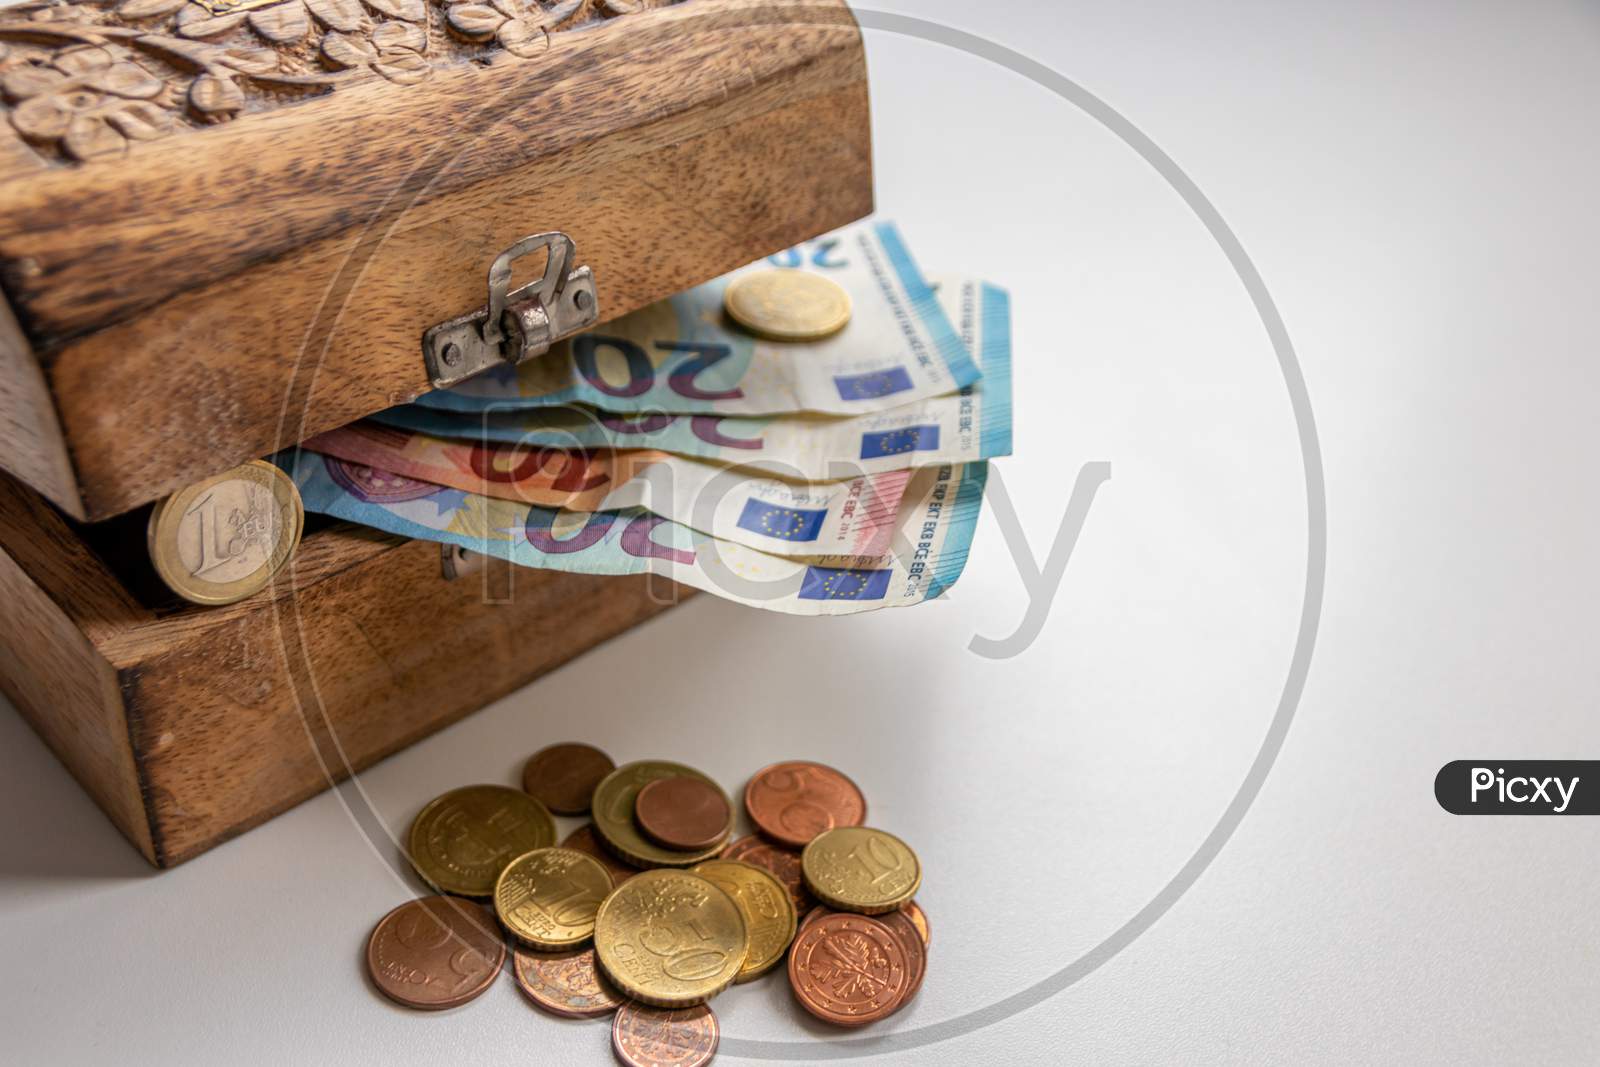 Variety of different bank notes and coins from various countries like euro, pound, emirates money, cyprus bank note and others represent the international market and global financial market